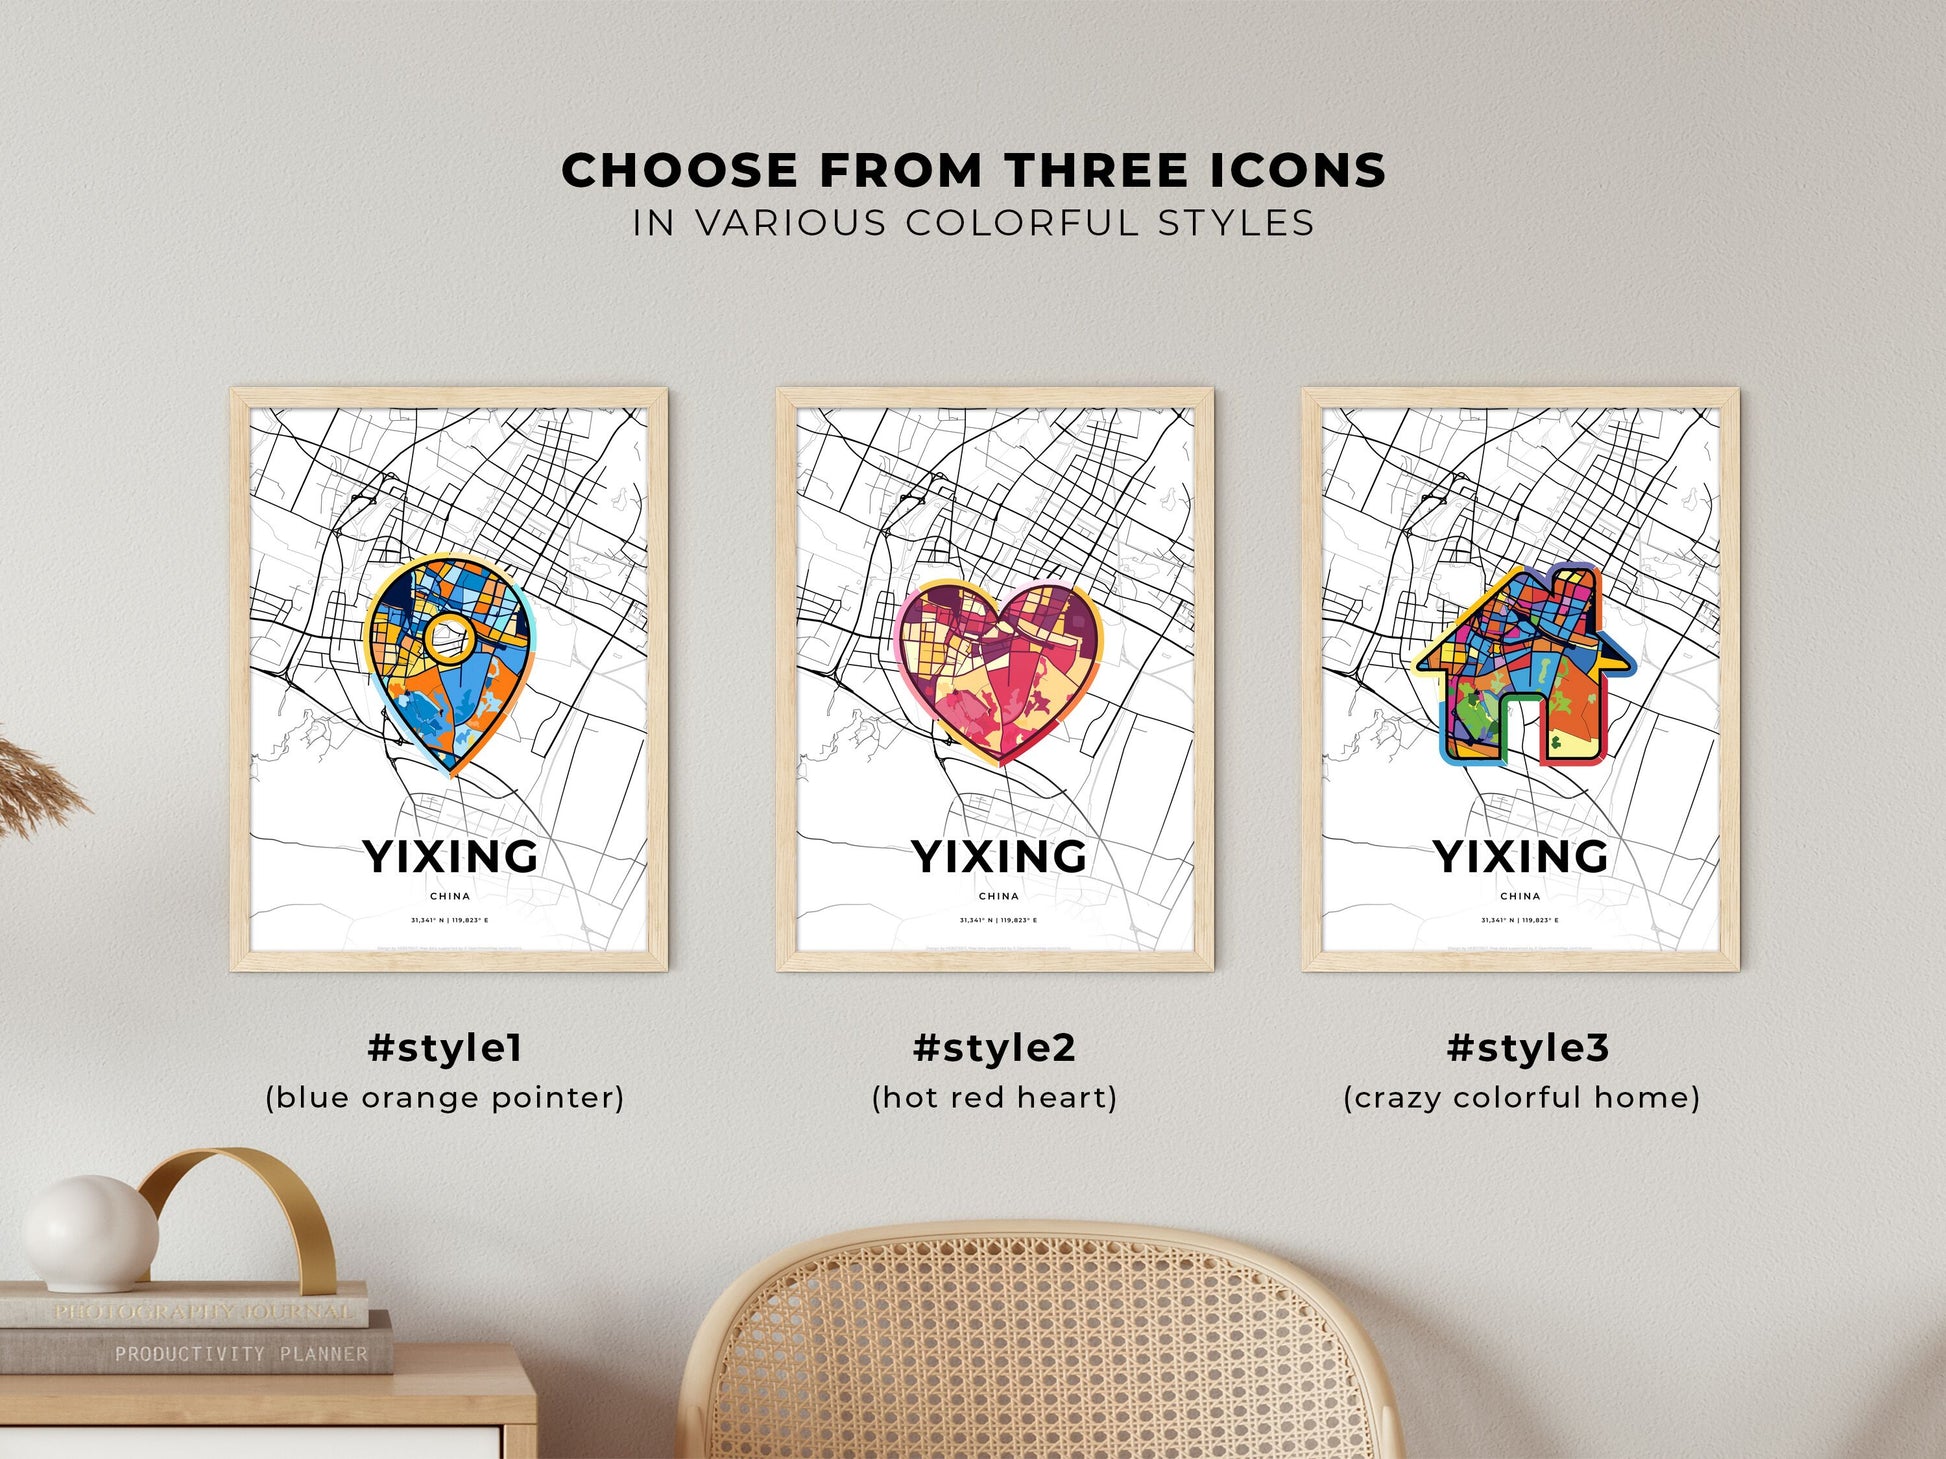 YIXING CHINA minimal art map with a colorful icon.